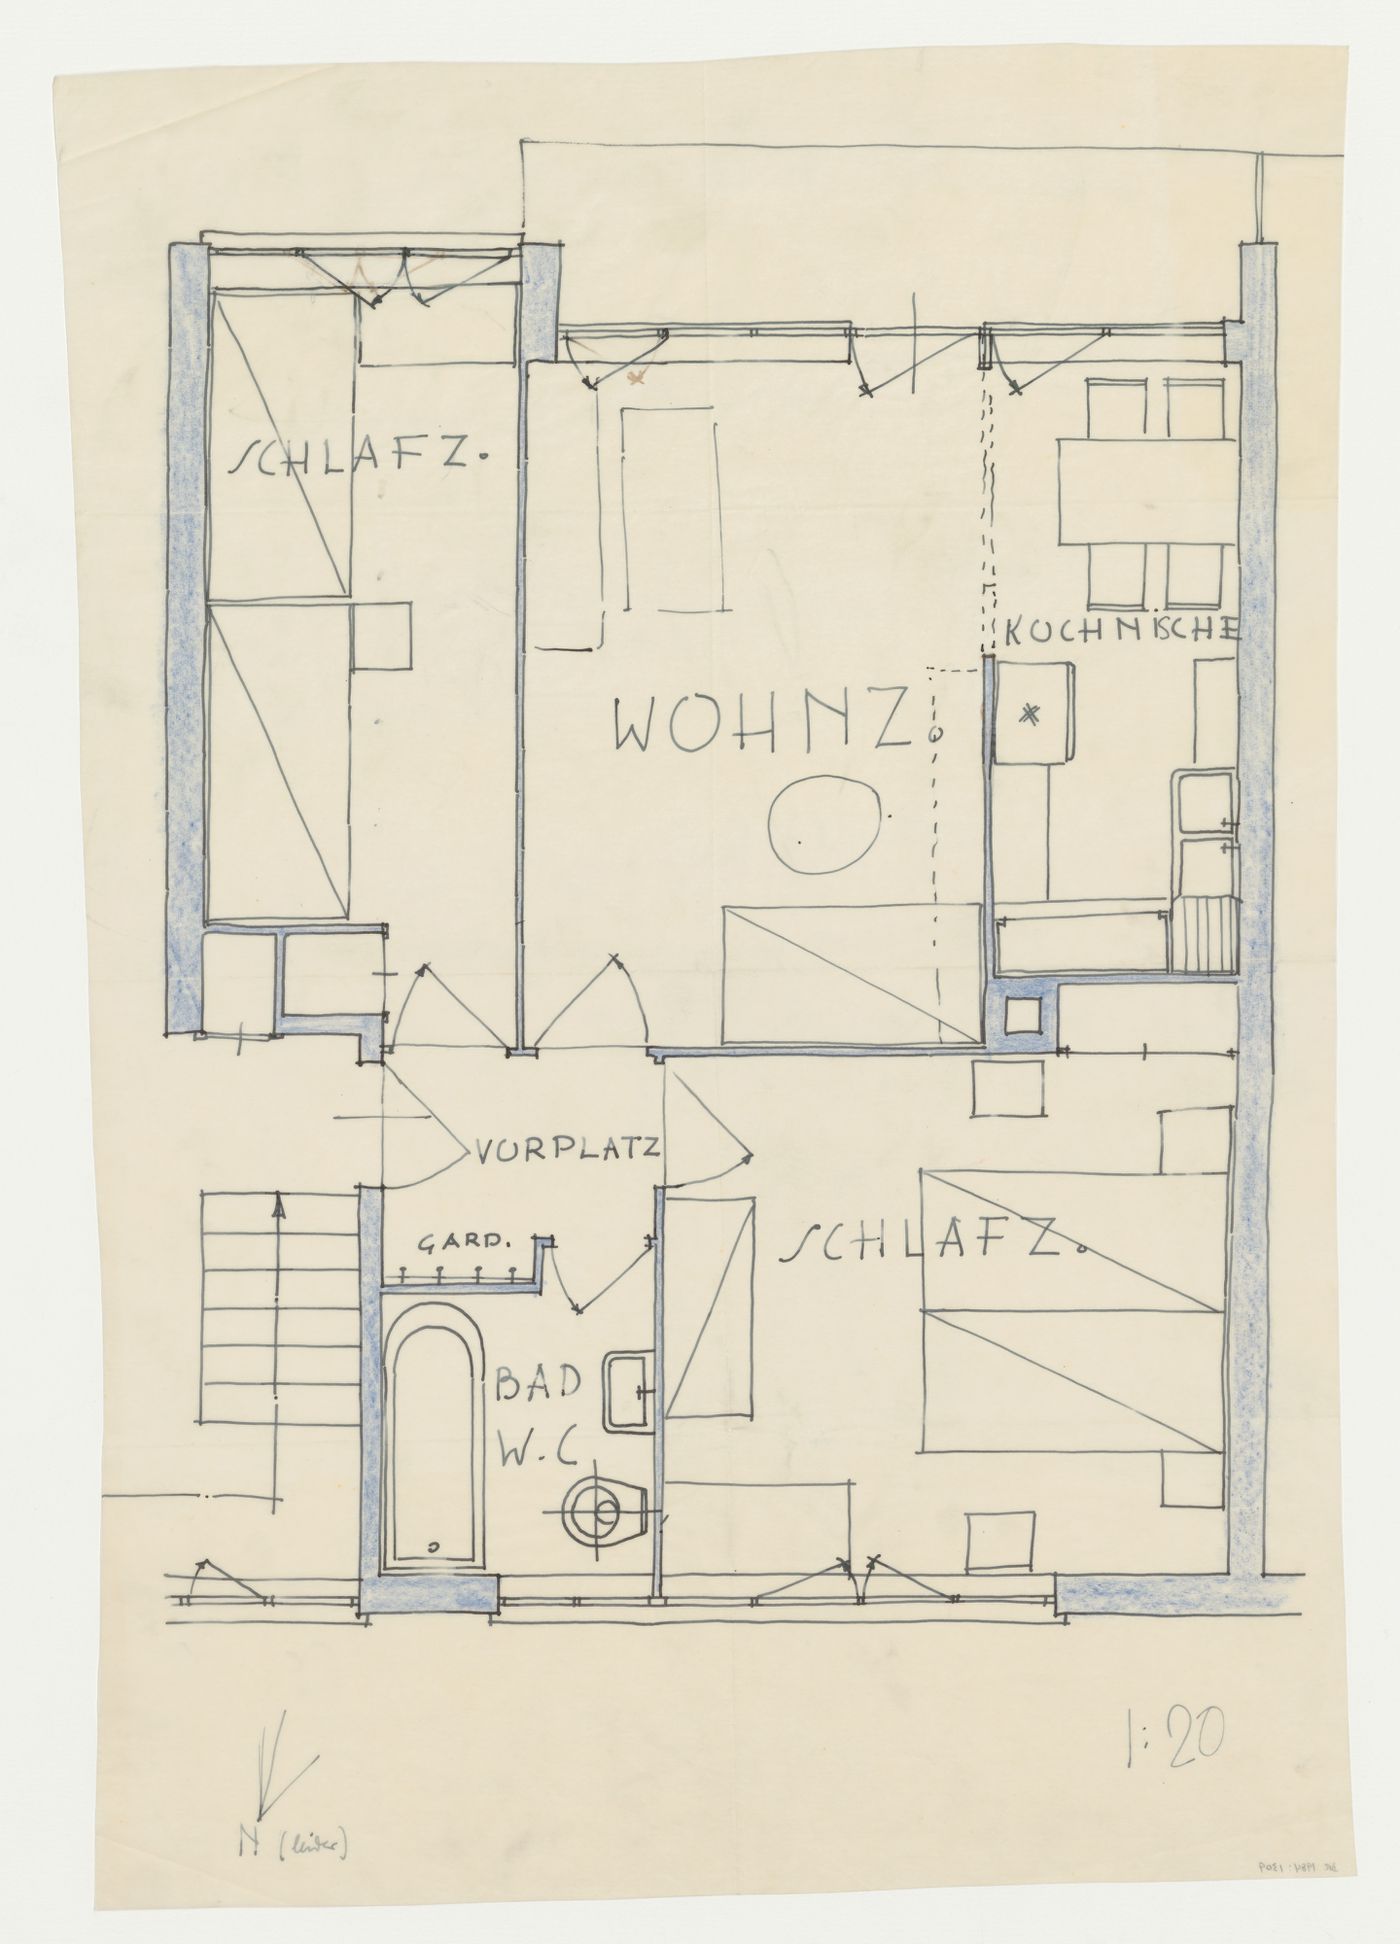 Ground floor plan for an unidentified house, Germany